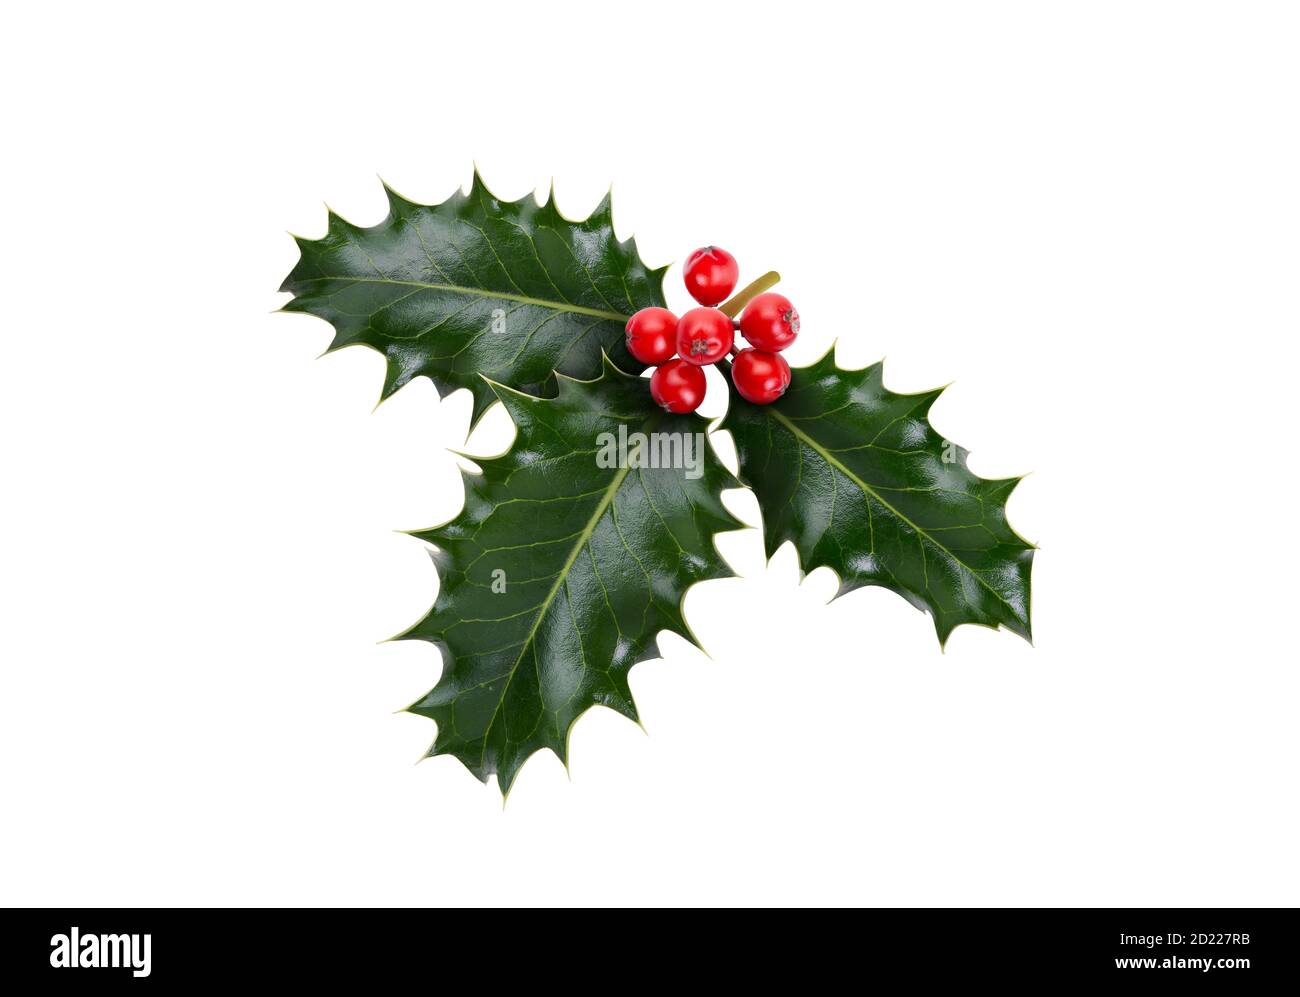 A sprig, three leaves, of green holly and red berries for Christmas decoration isolated against a white background. Stock Photo